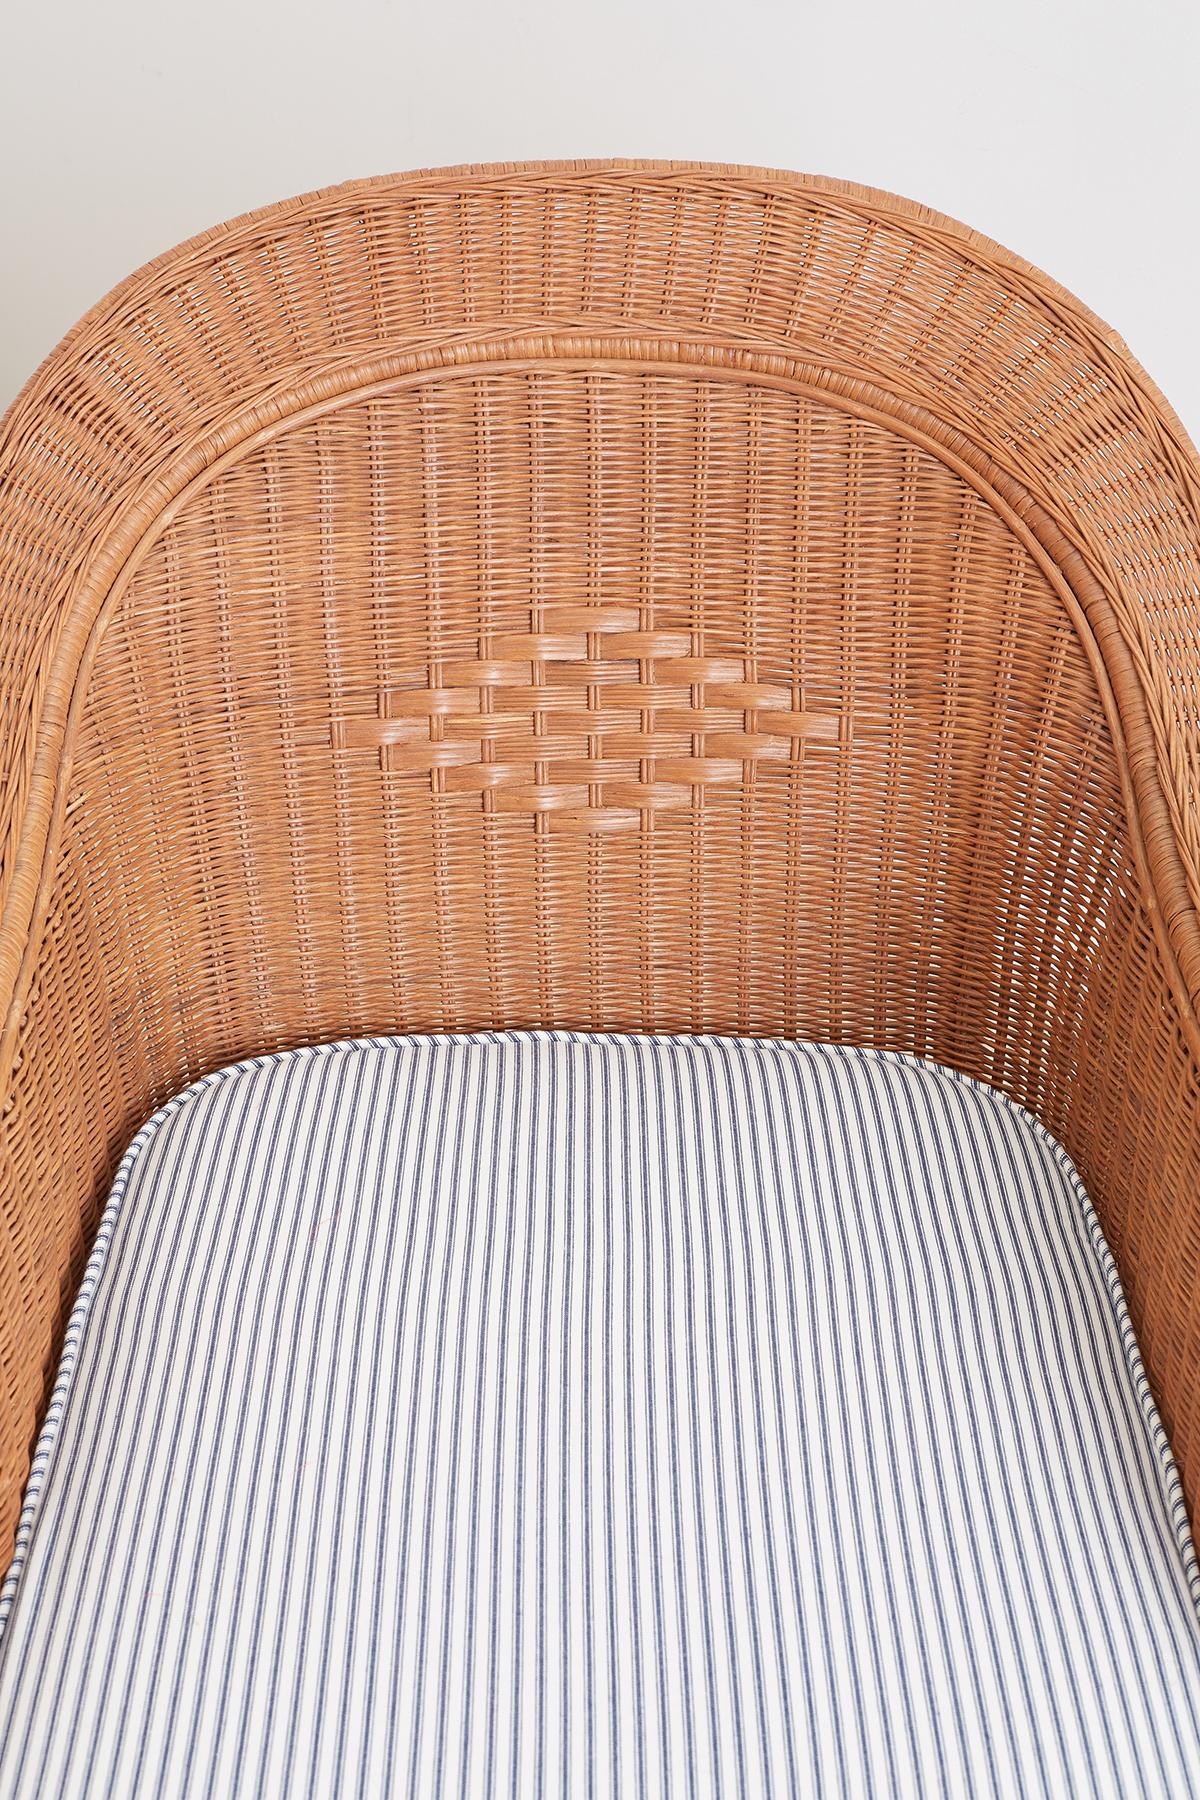 Art Deco French Style Wicker Chaise Longue with Waverly Ticking Stripe Upholstery